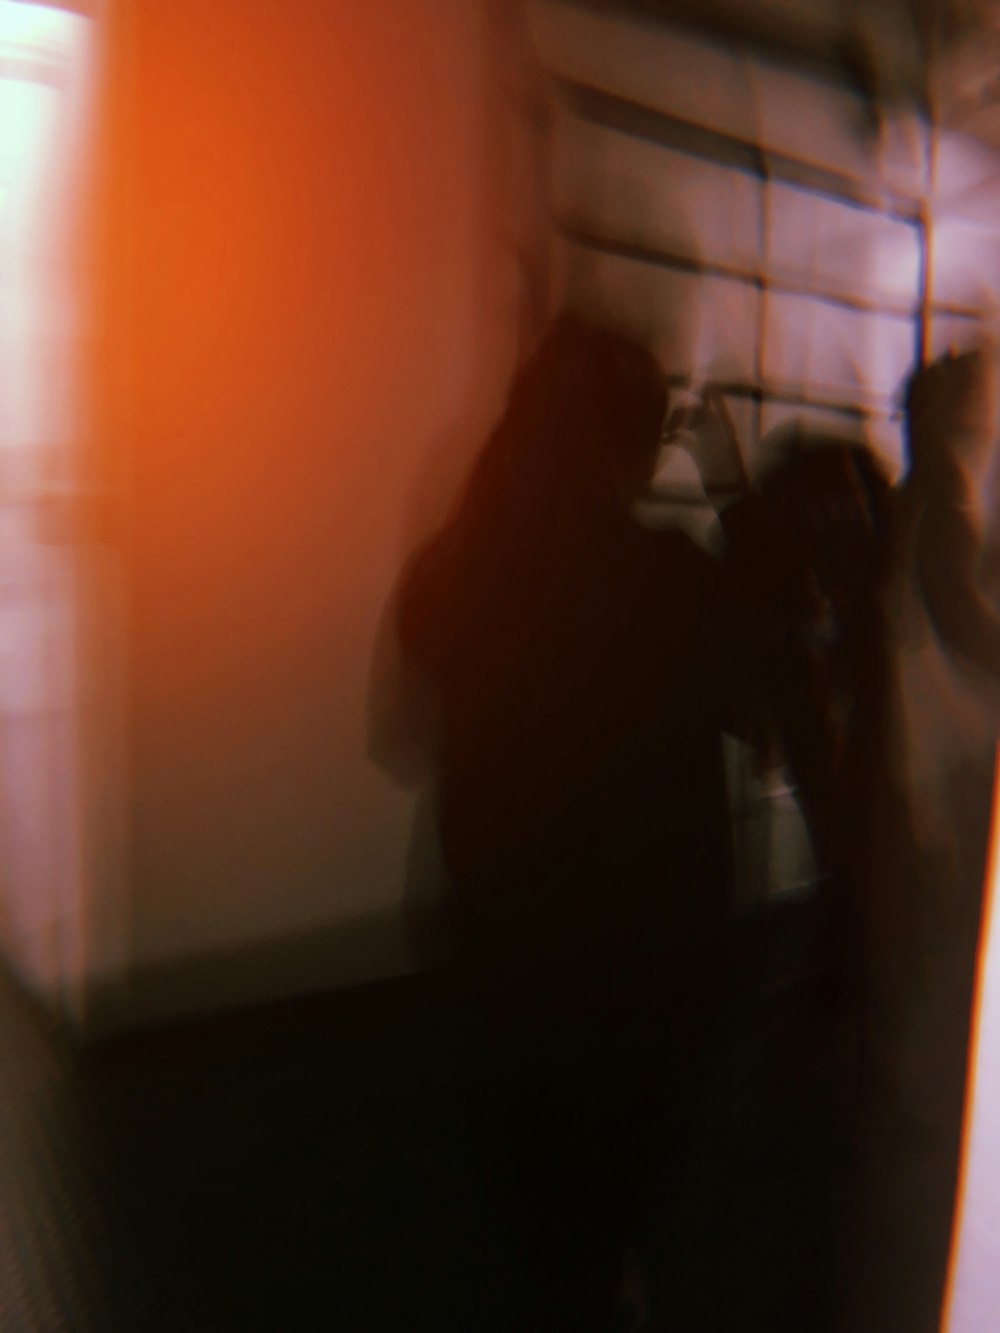 a blurry photo of a person standing in a room